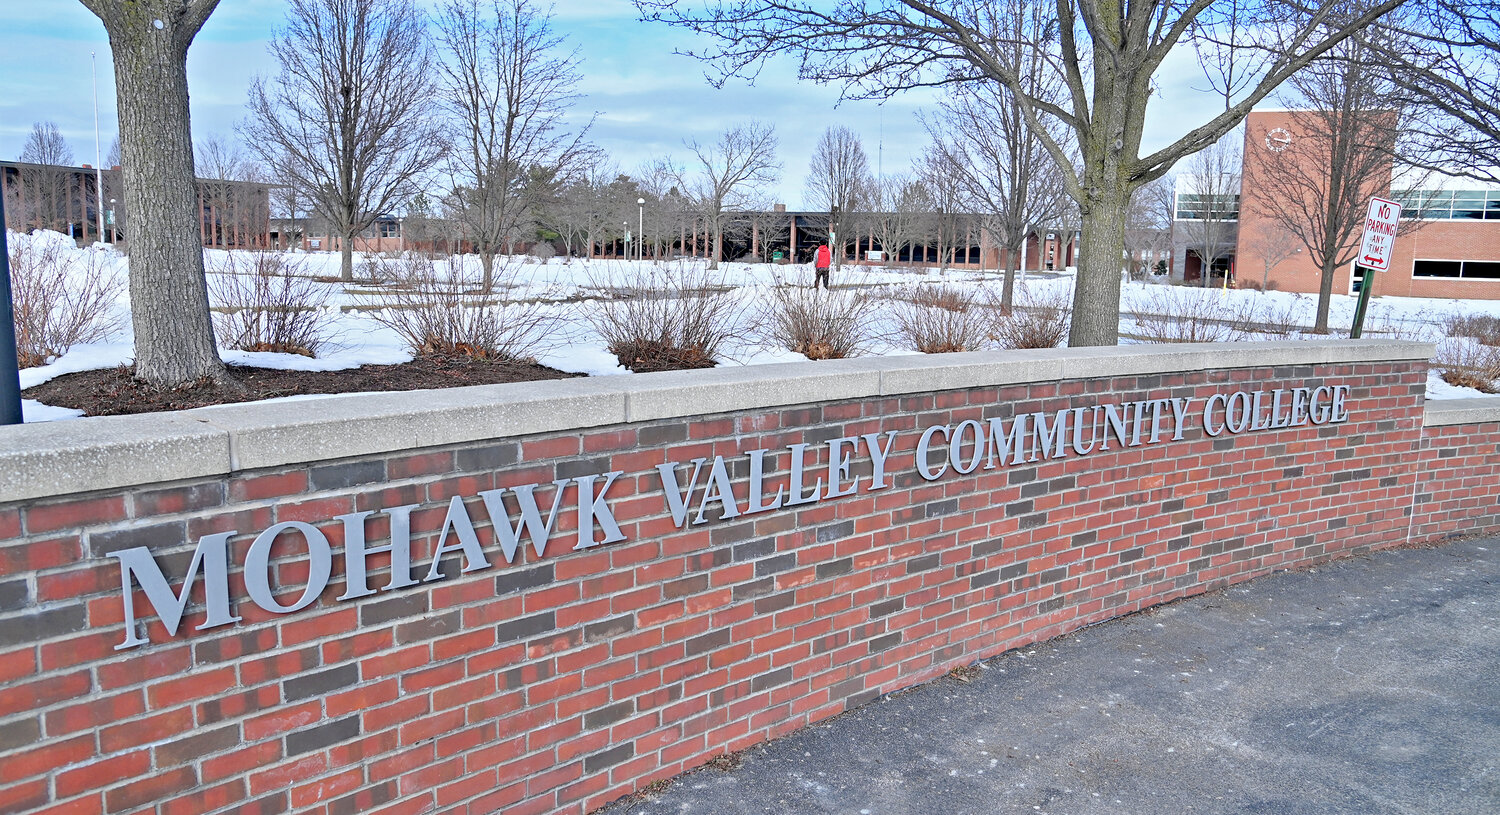 MVCC students walk around the Mohawk Valley Community College campus Wednesday, March 8 in Utica. The college promotes dual credit courses that allow students to earn college credits while still in high school.